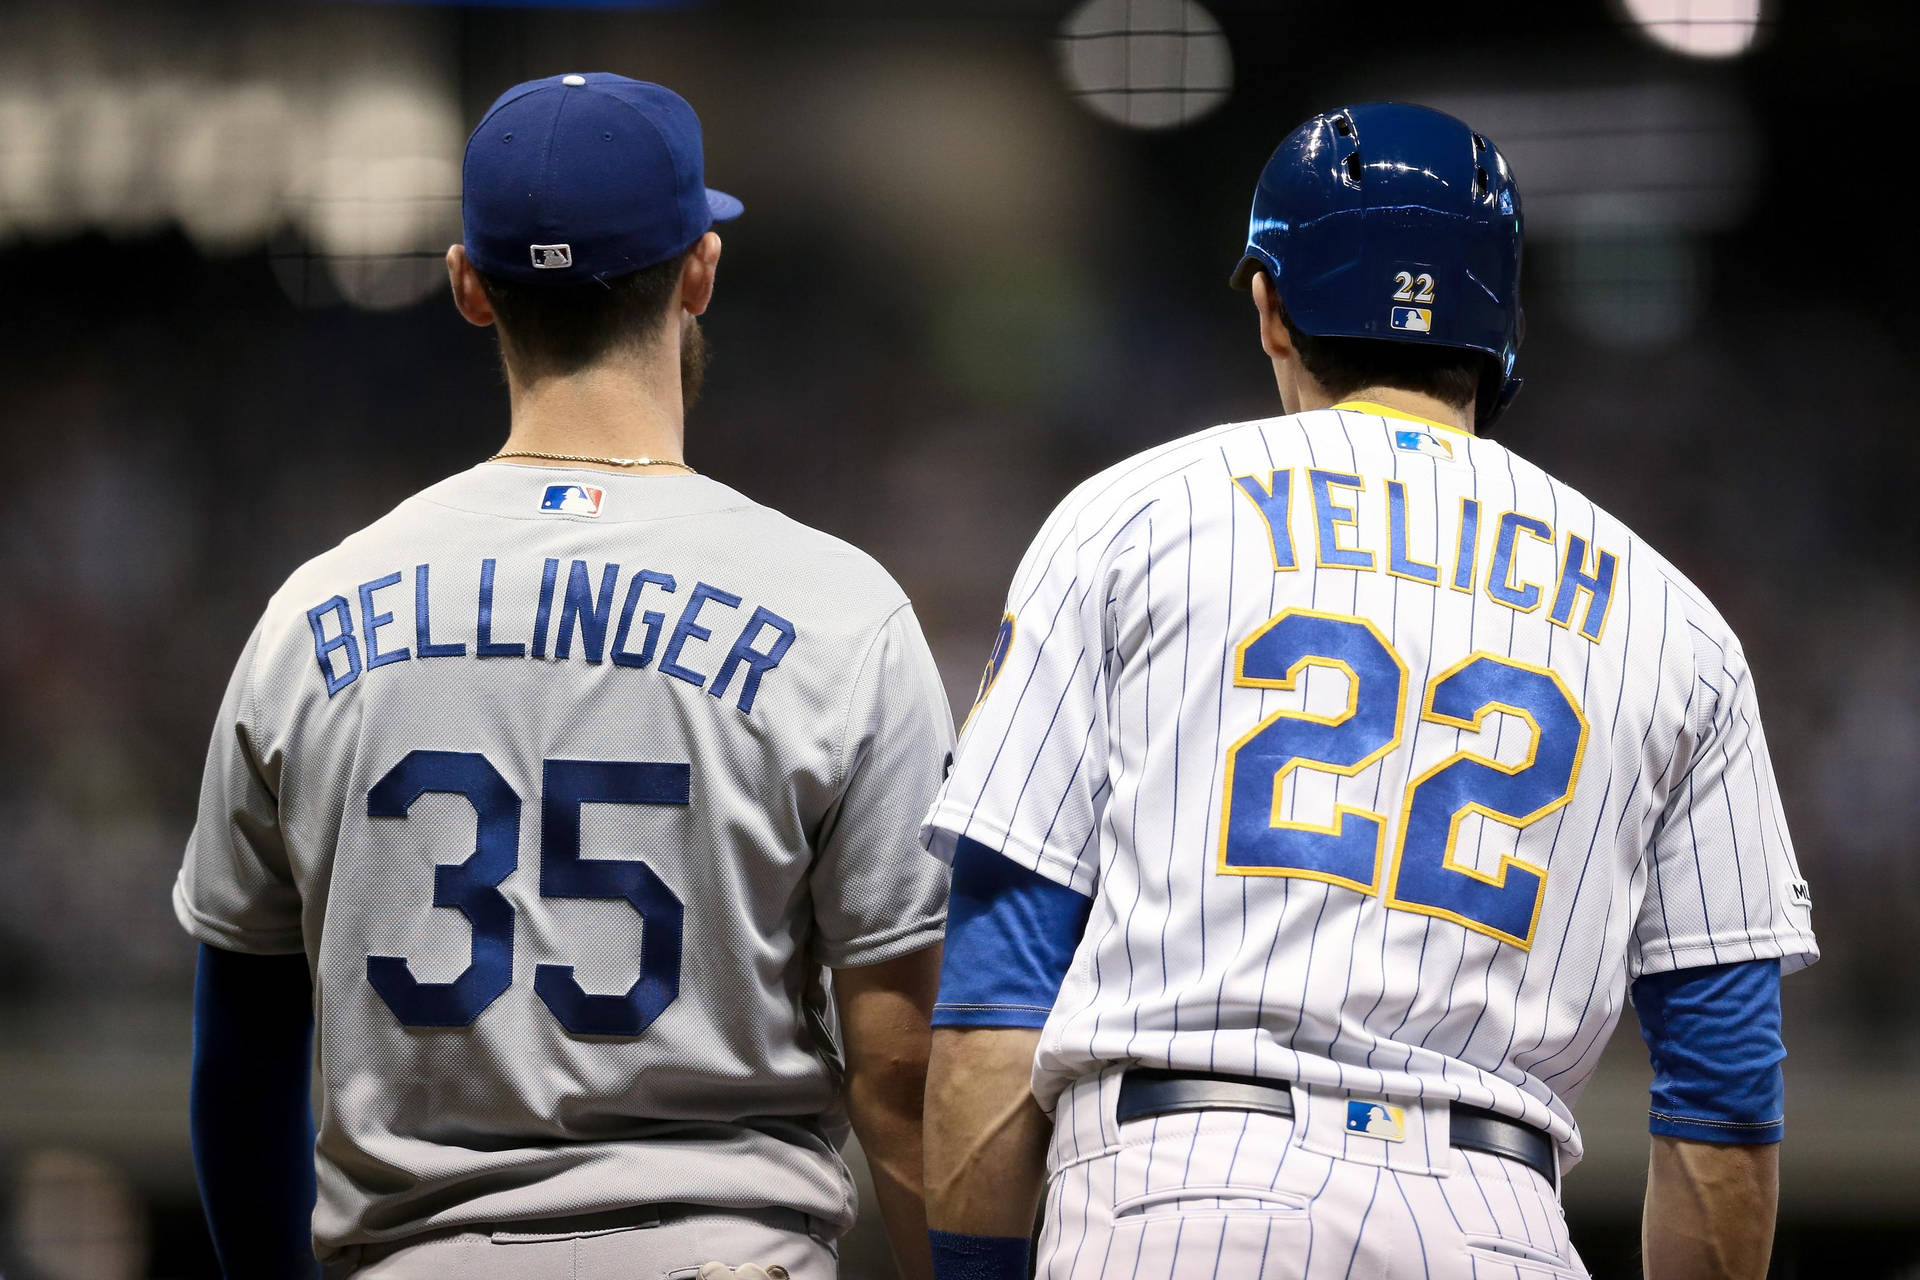 Cody Bellinger And Christian Yelich Background